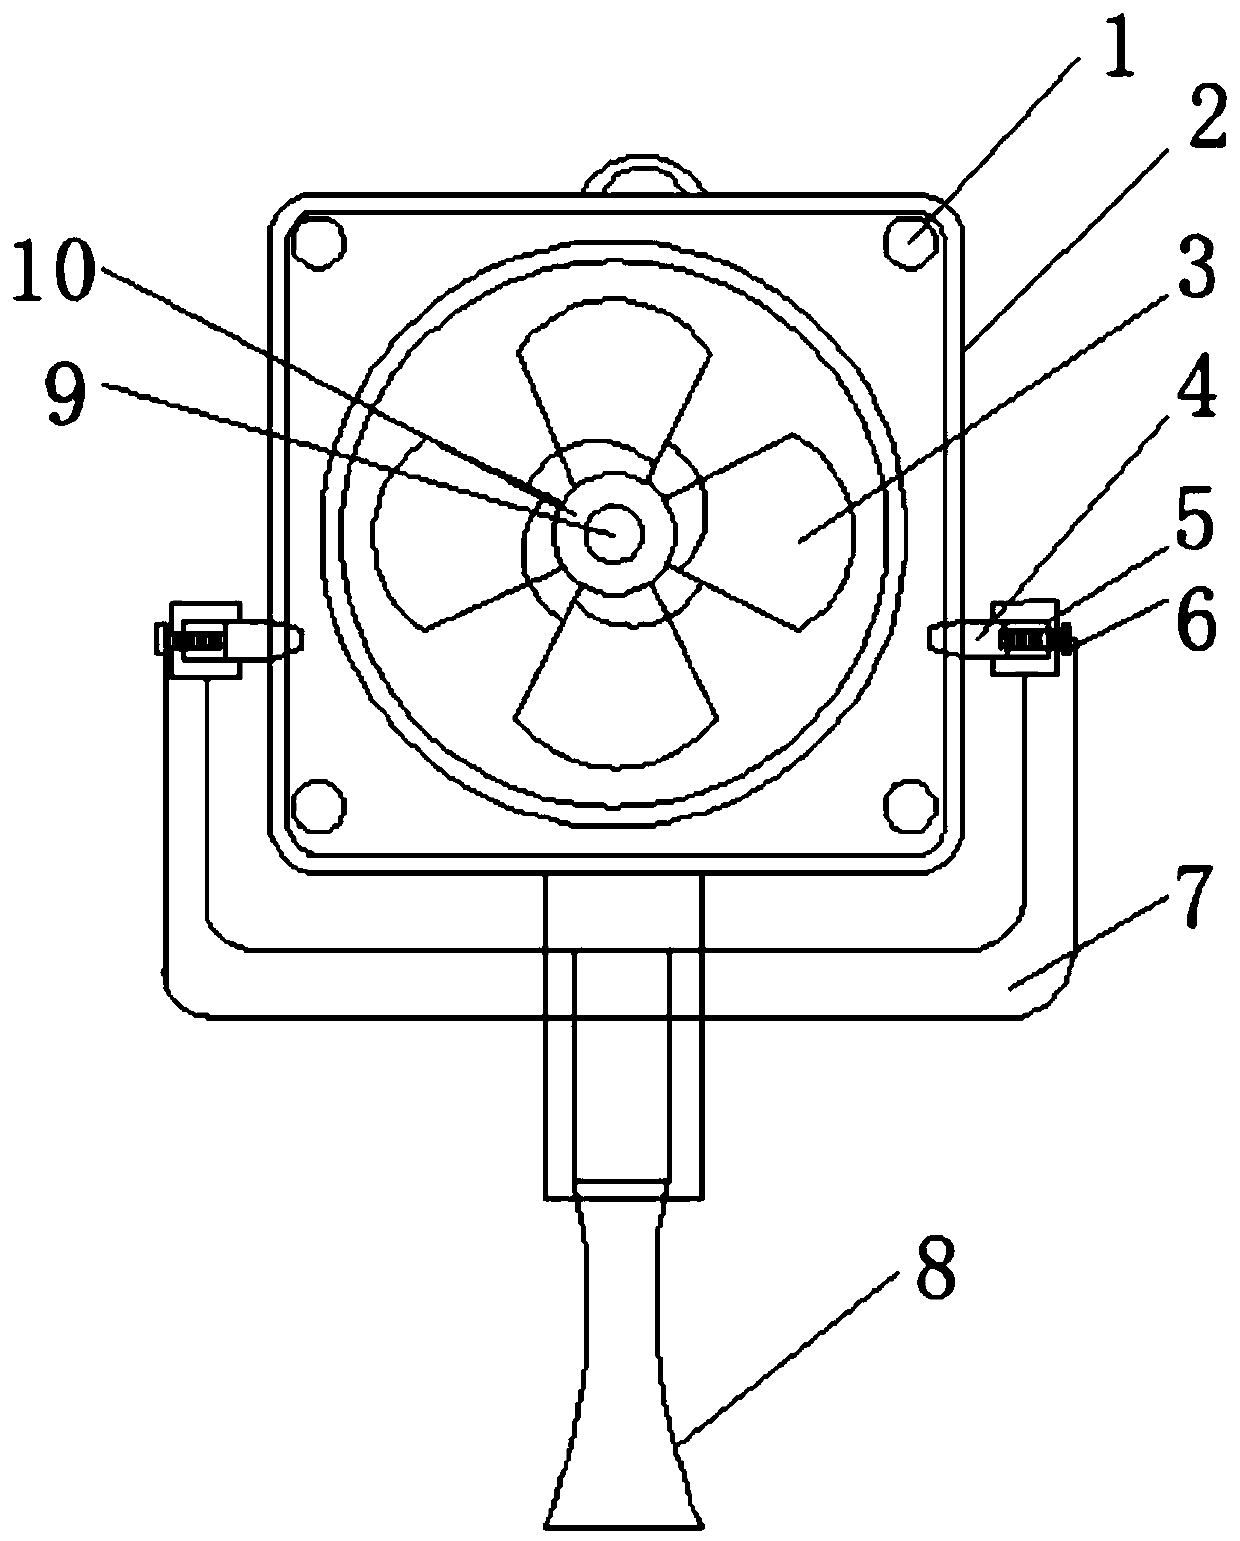 A portable fan with adjustable vertical angle